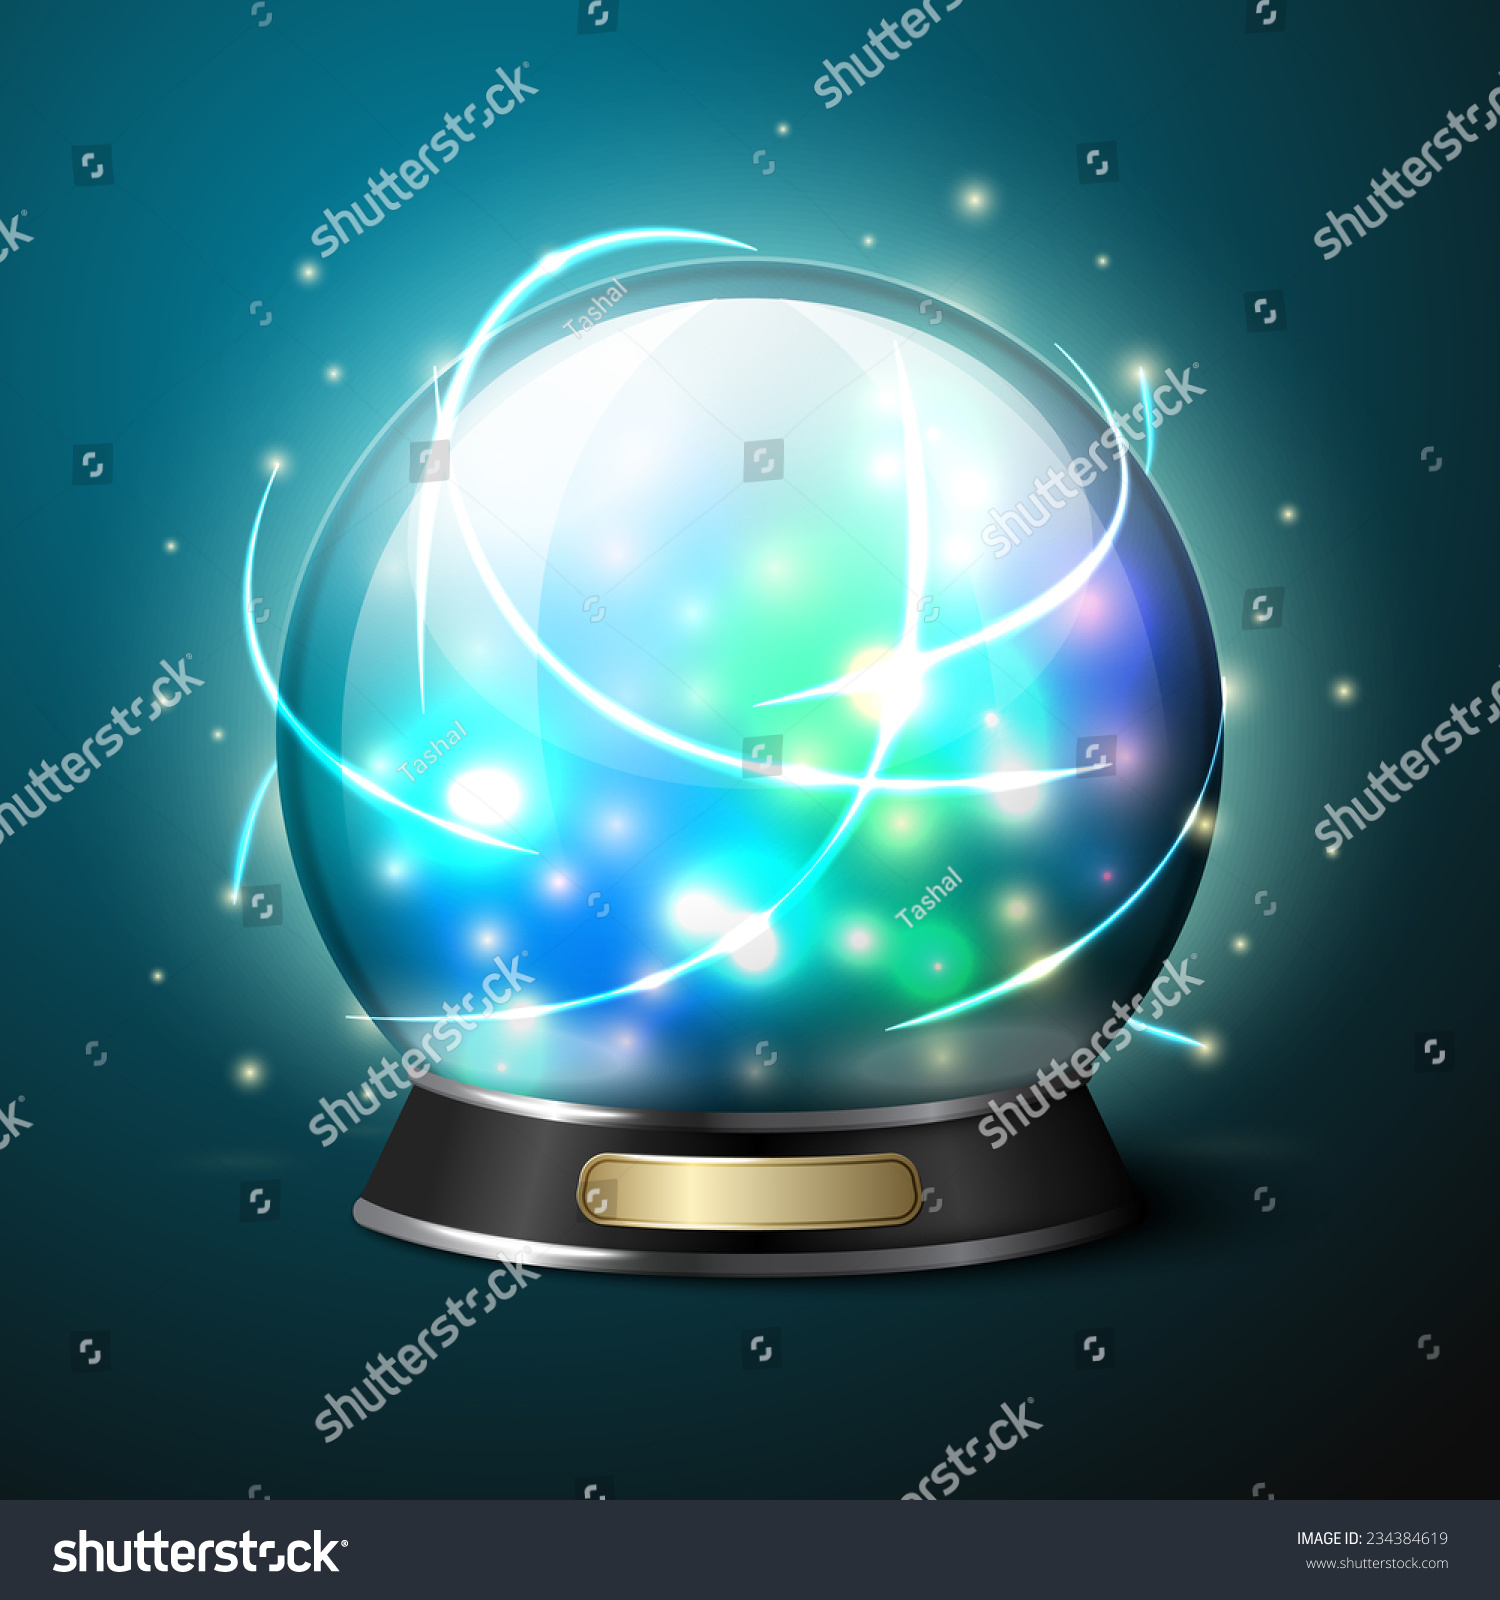 stock-vector-vector-bright-glowing-crystal-ball-for-fortune-tellers-234384619.jpg